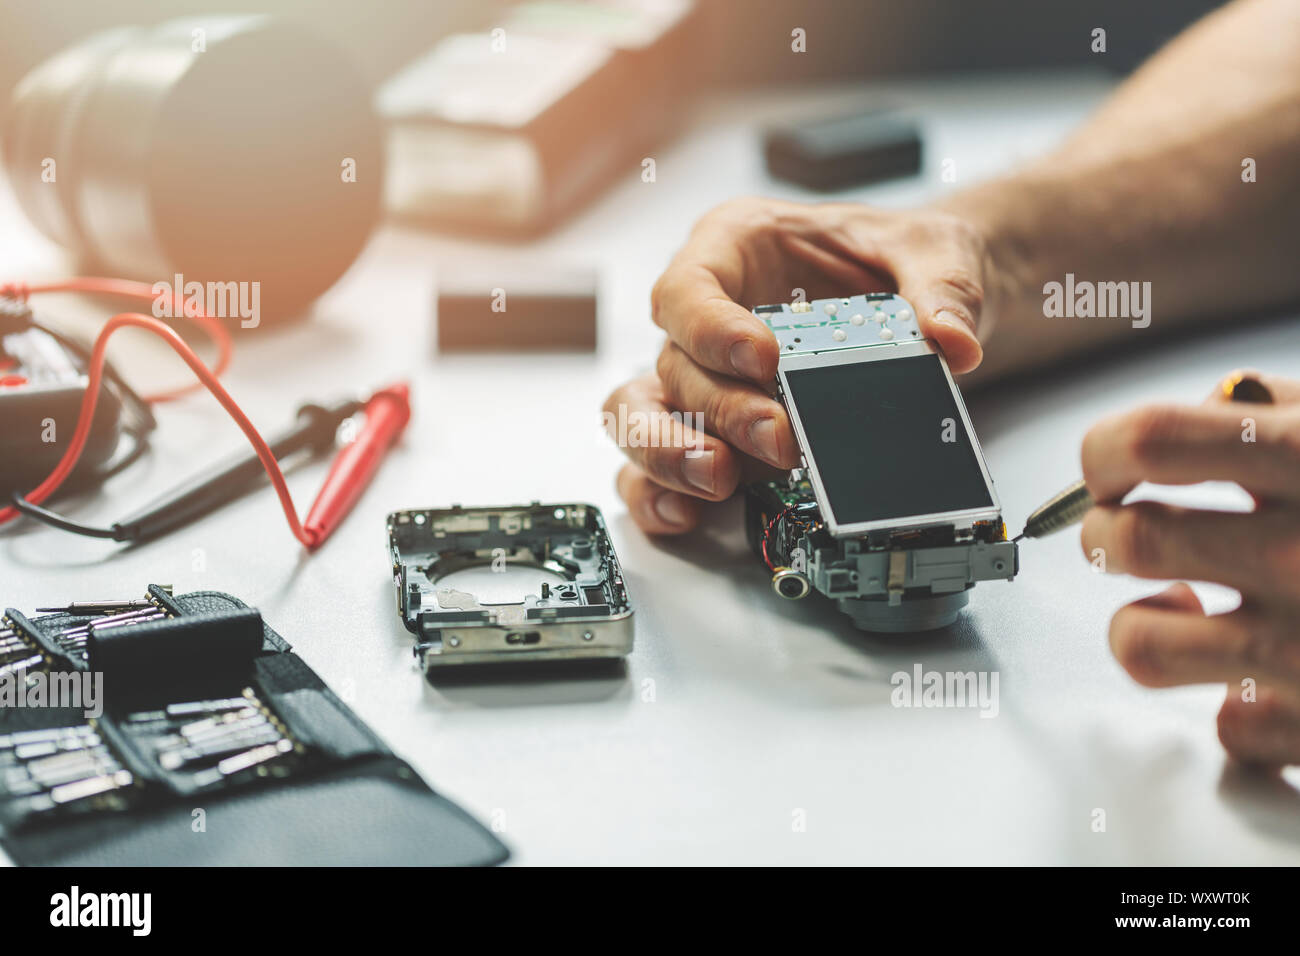 electronic device repair service - man installing new display to digital camera Stock Photo